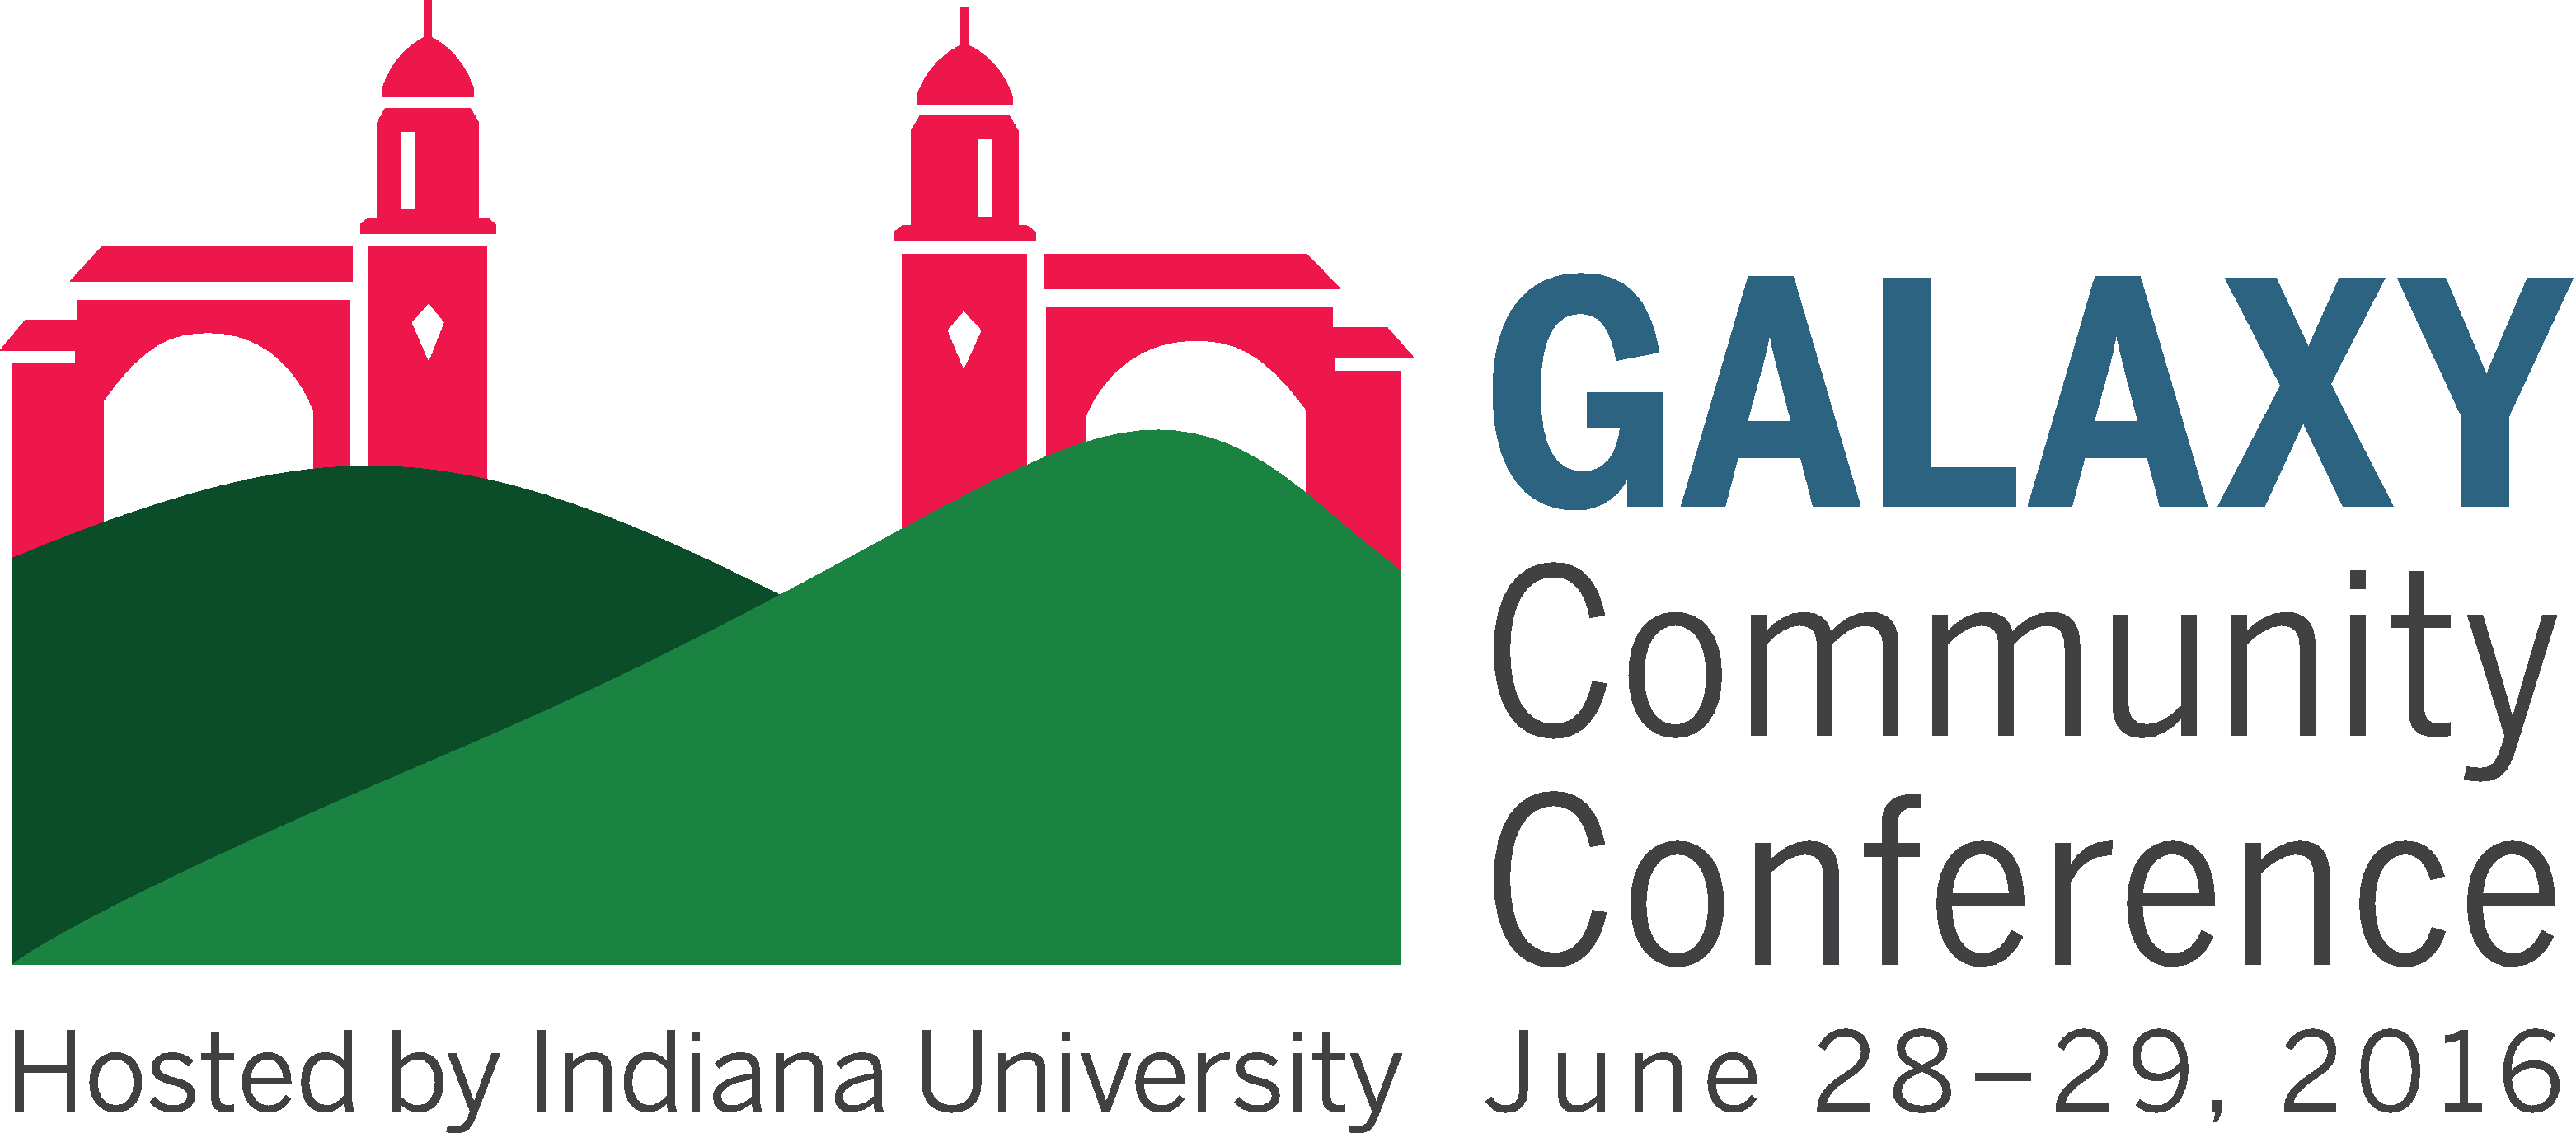 2016 Galaxy Community Conference